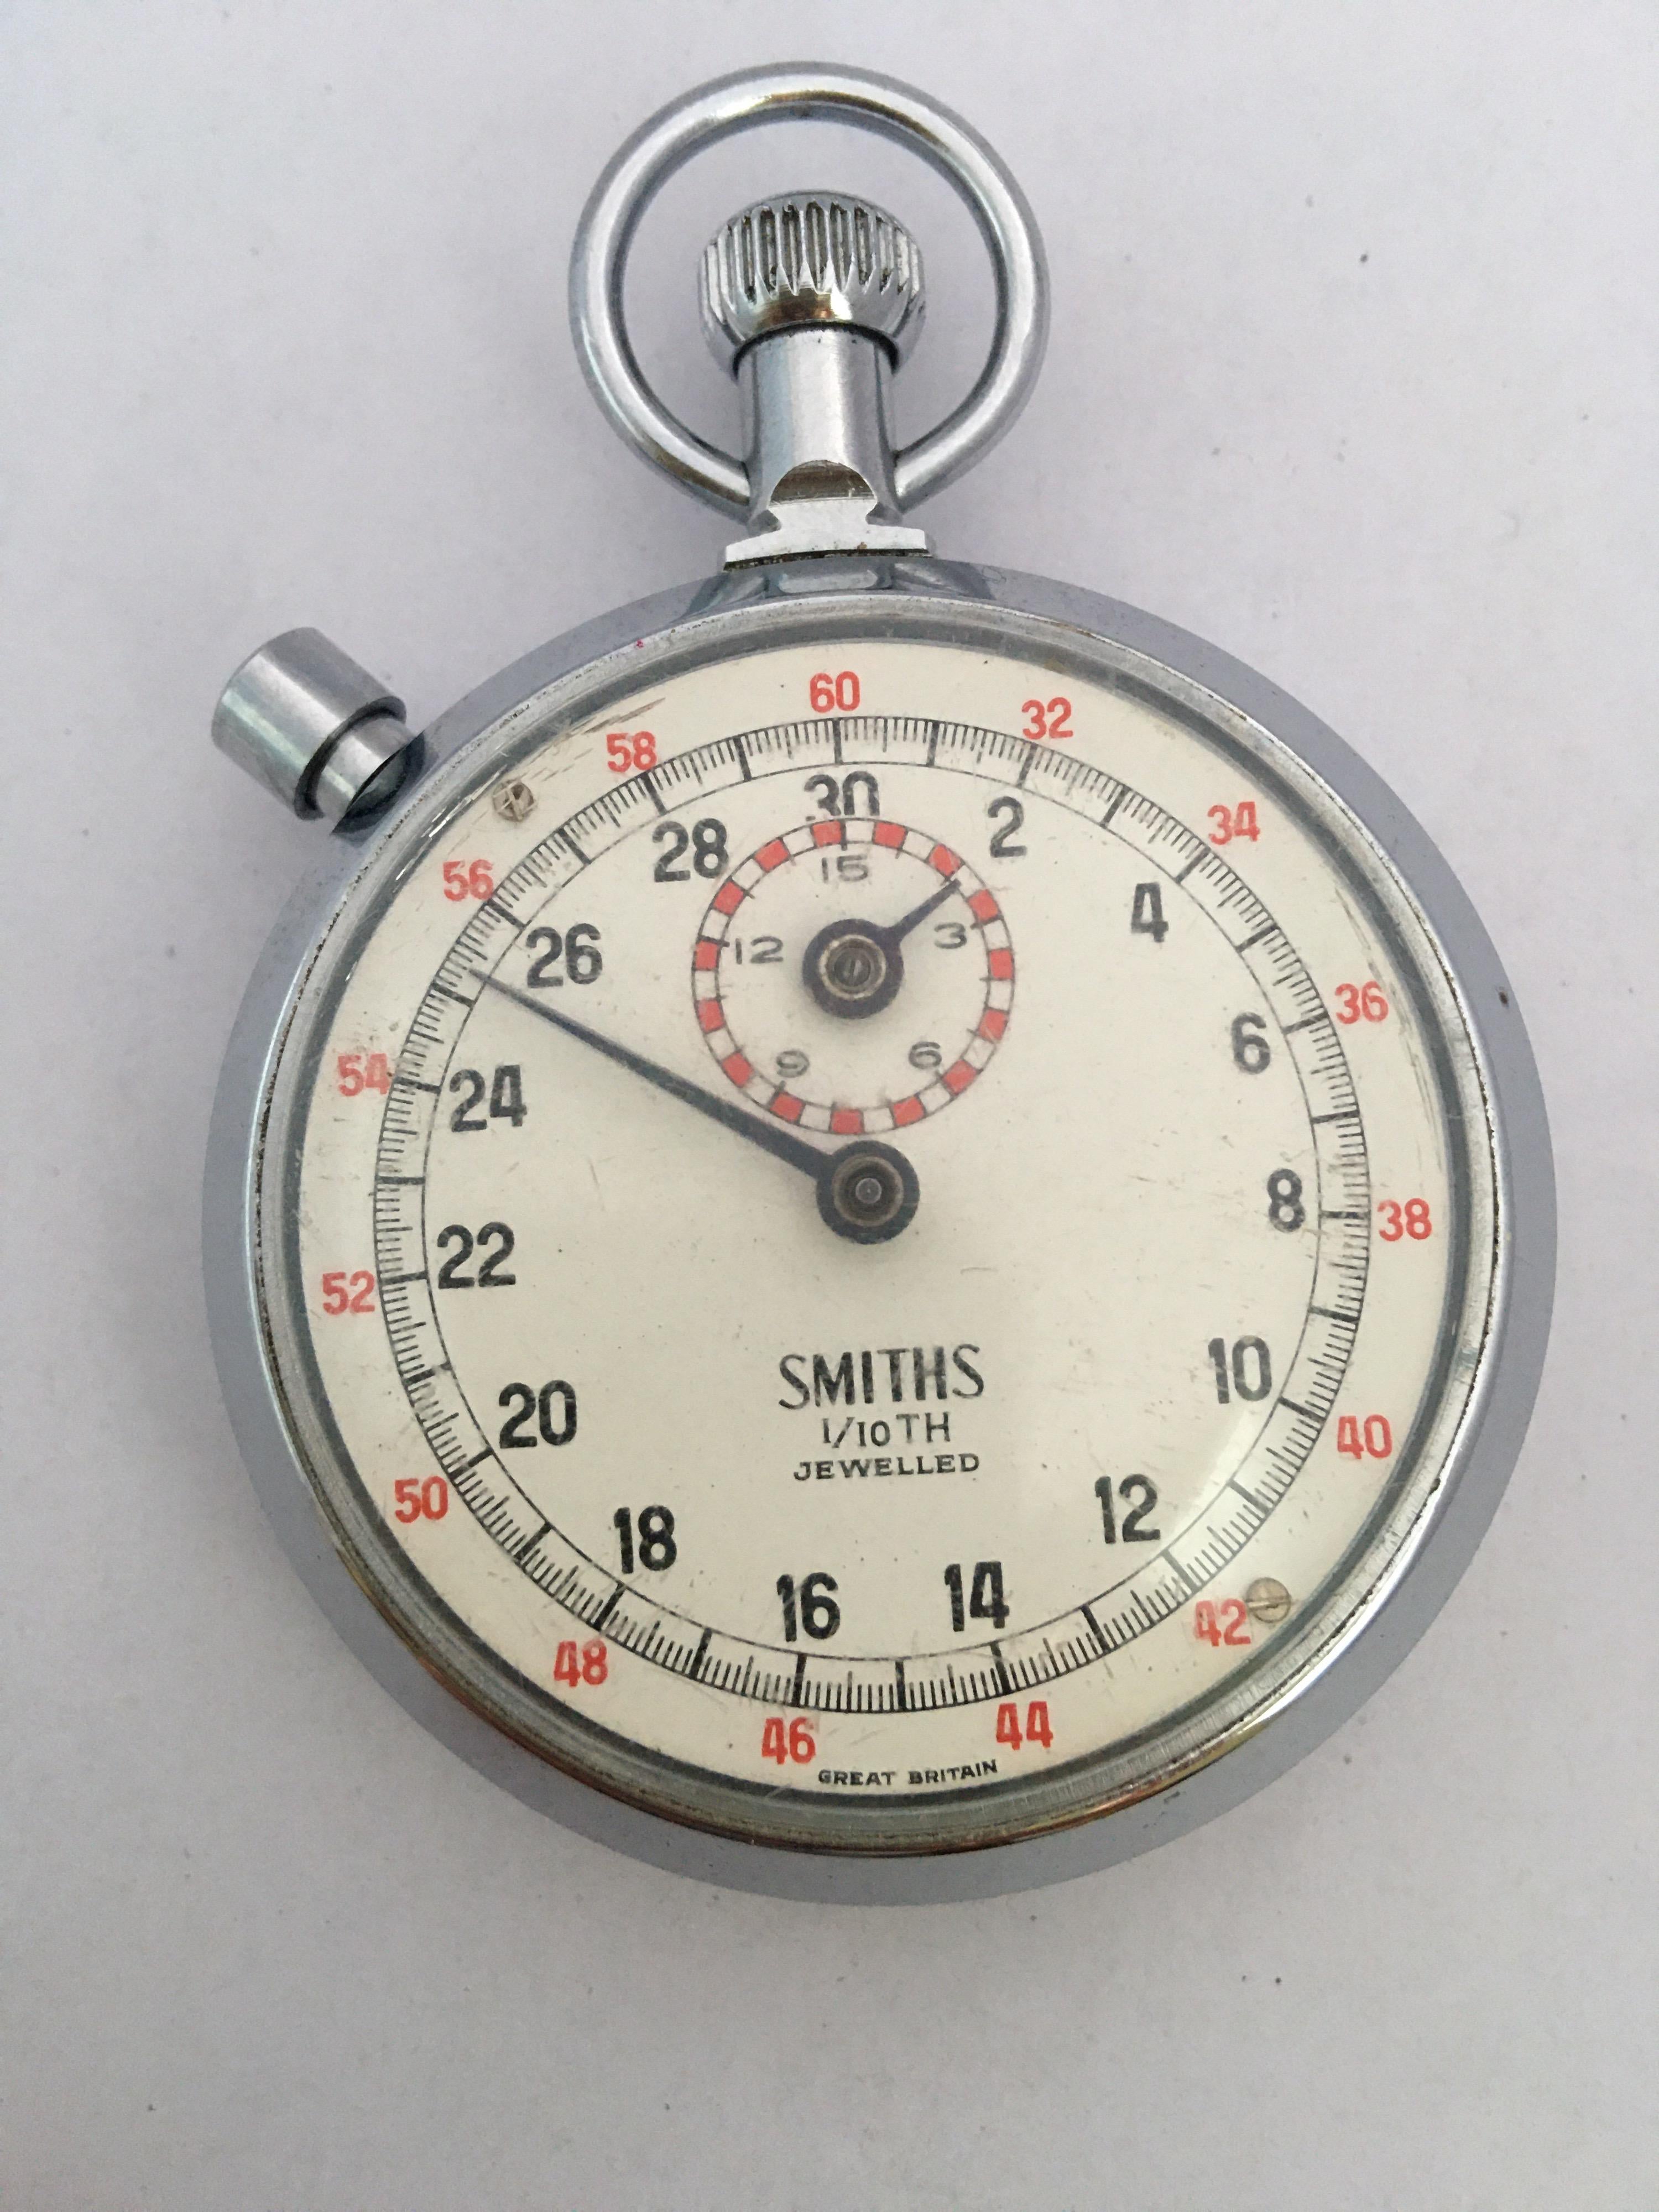 Smiths Sport Timer 1/10 TH Jewelled Stop Watch Handheld Fitness Sports For Sale 4